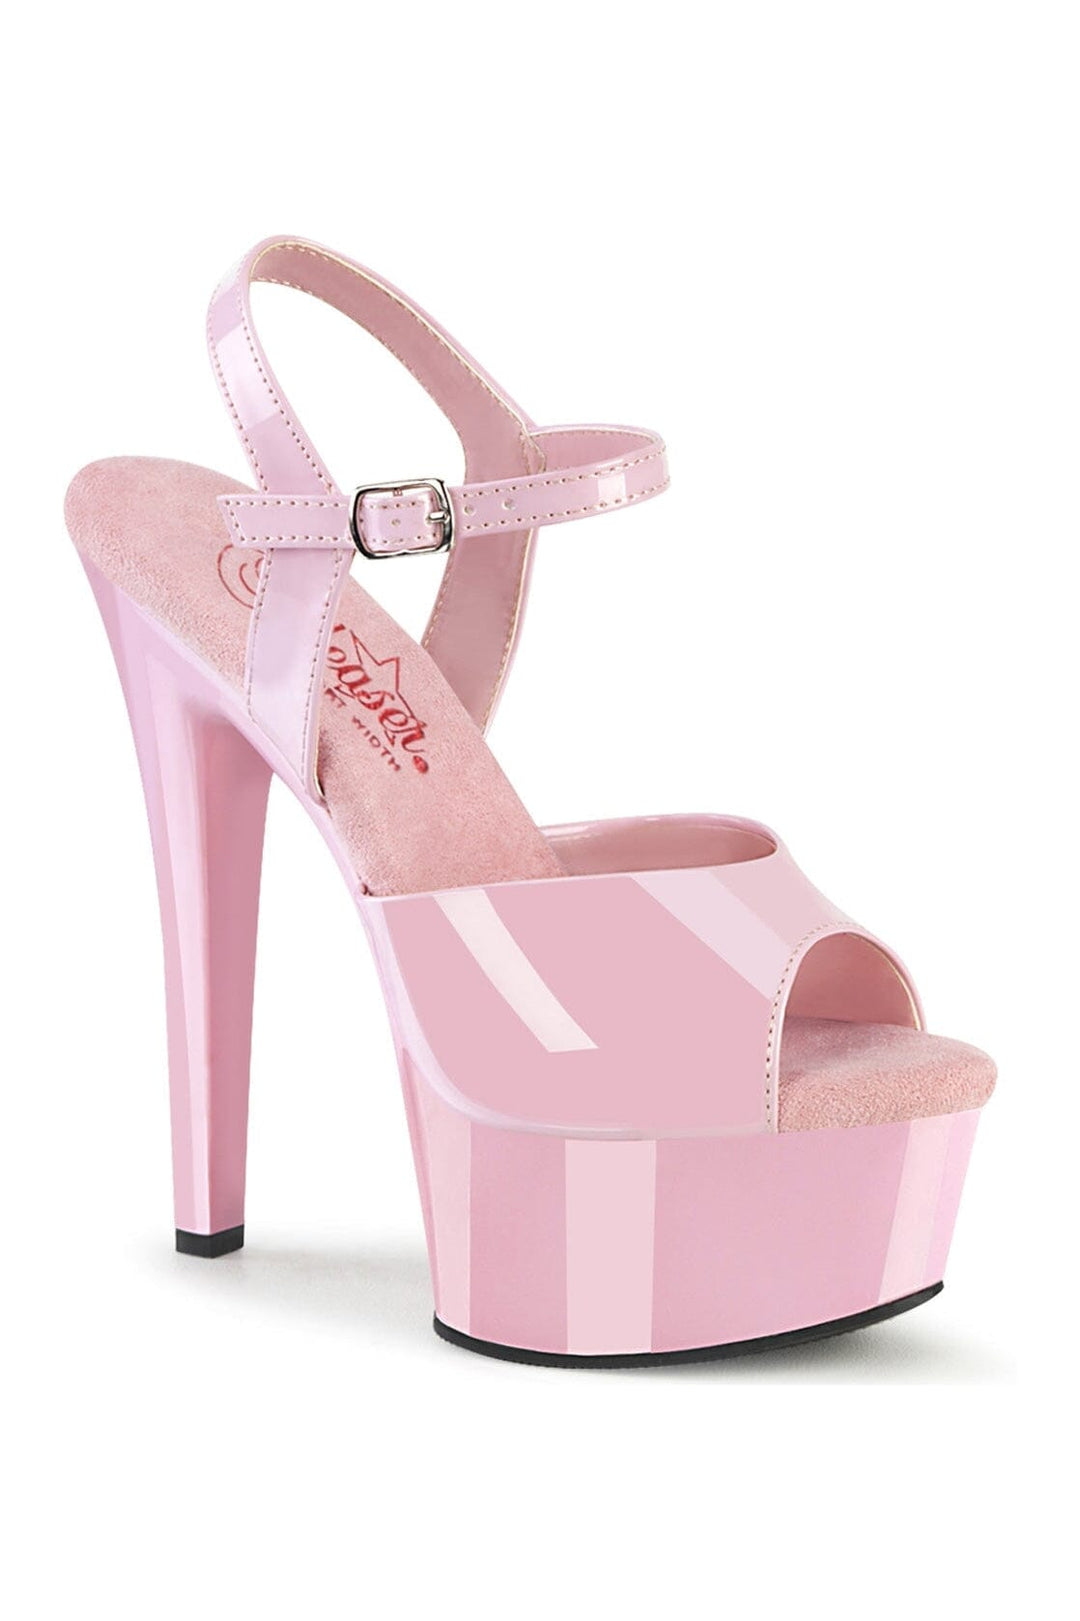 GLEAM-609 Pink Patent Sandal-Sandals-Pleaser-Pink-10-Patent-SEXYSHOES.COM